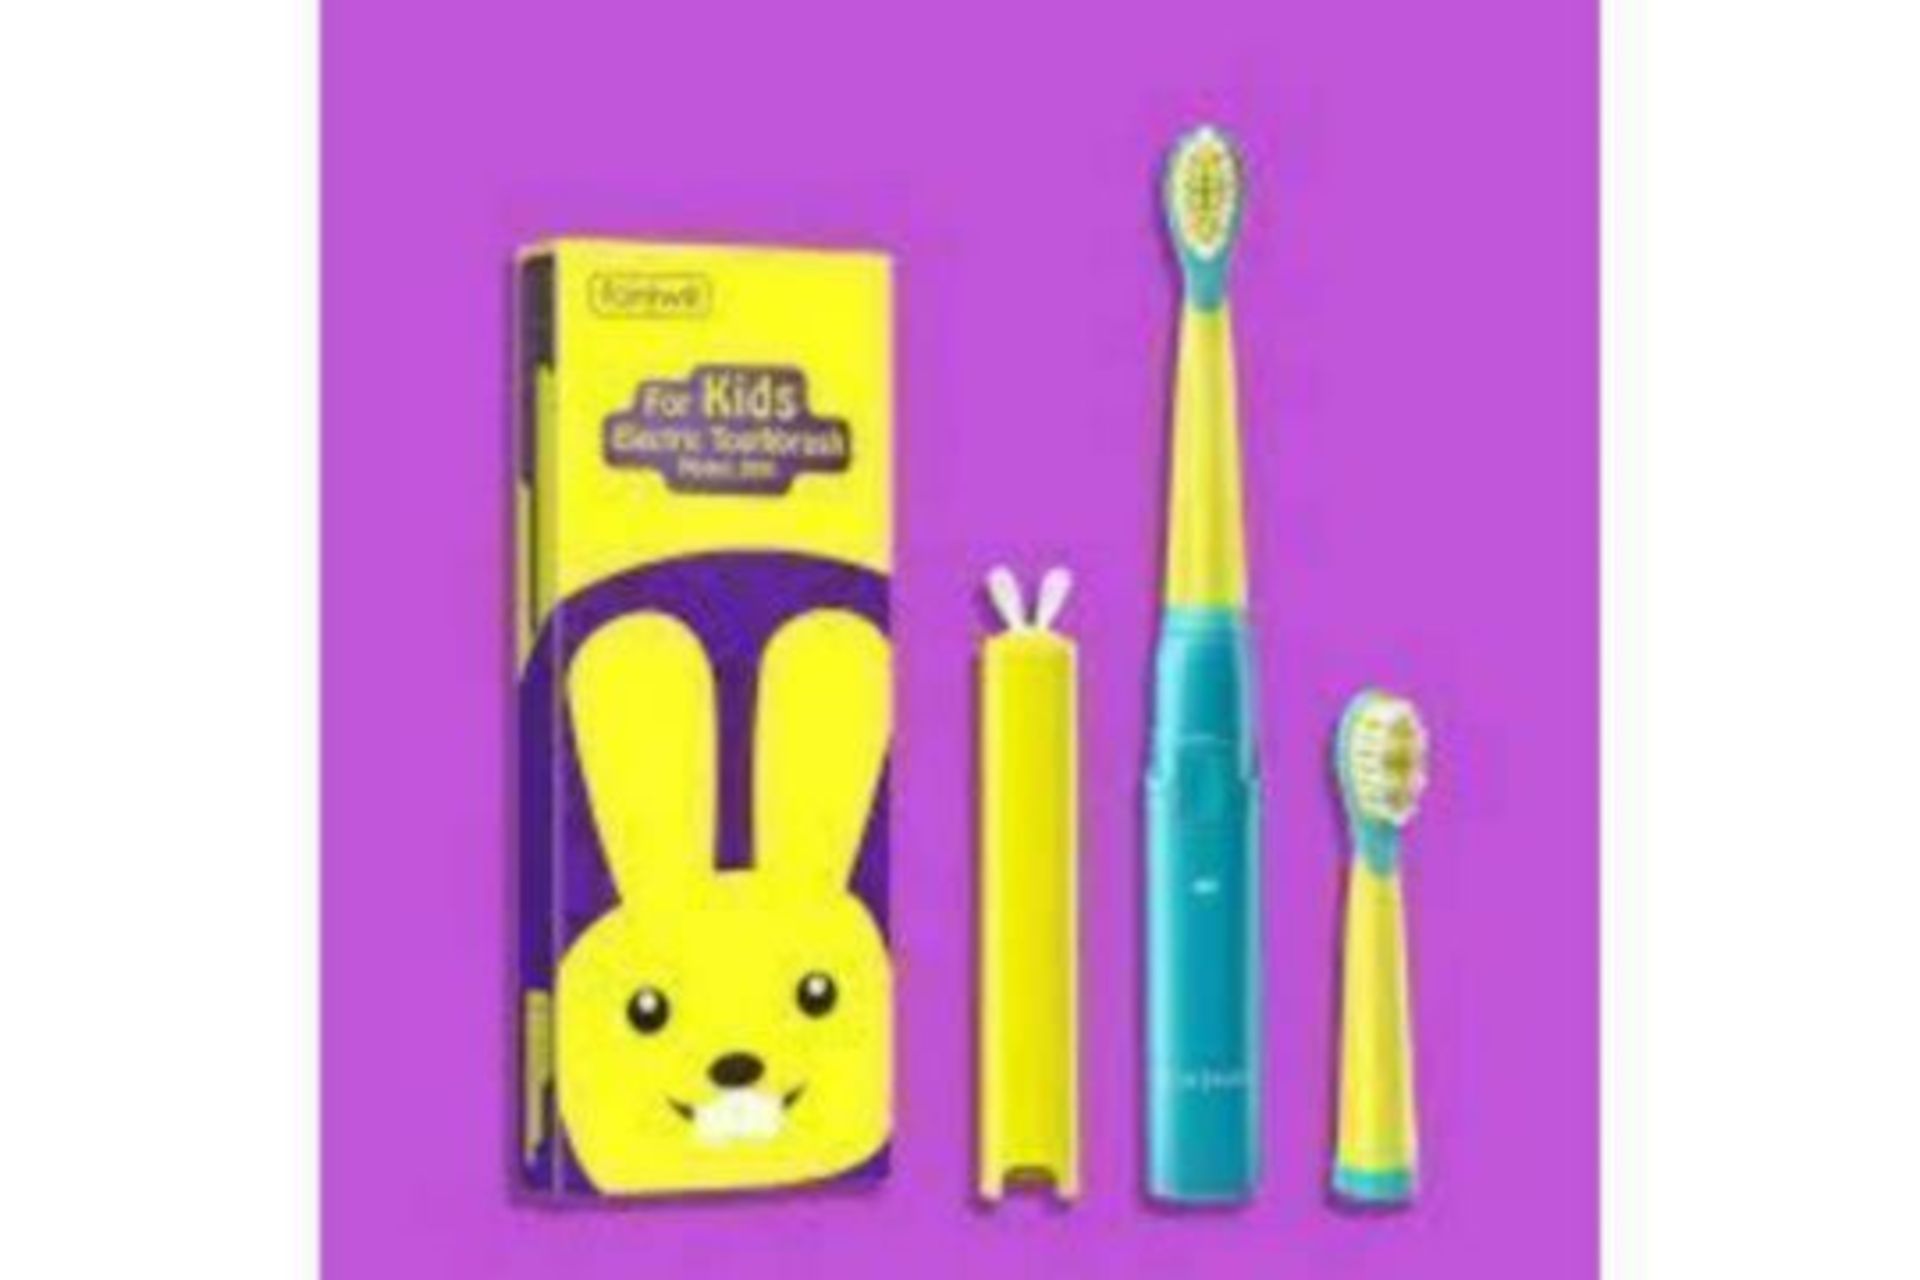 TRADE LOT 24 X BRAND NEW FAIRYWILL CHILDRENS RABBIT CHARACTER ELECTRIC TOOTHBRUSHES